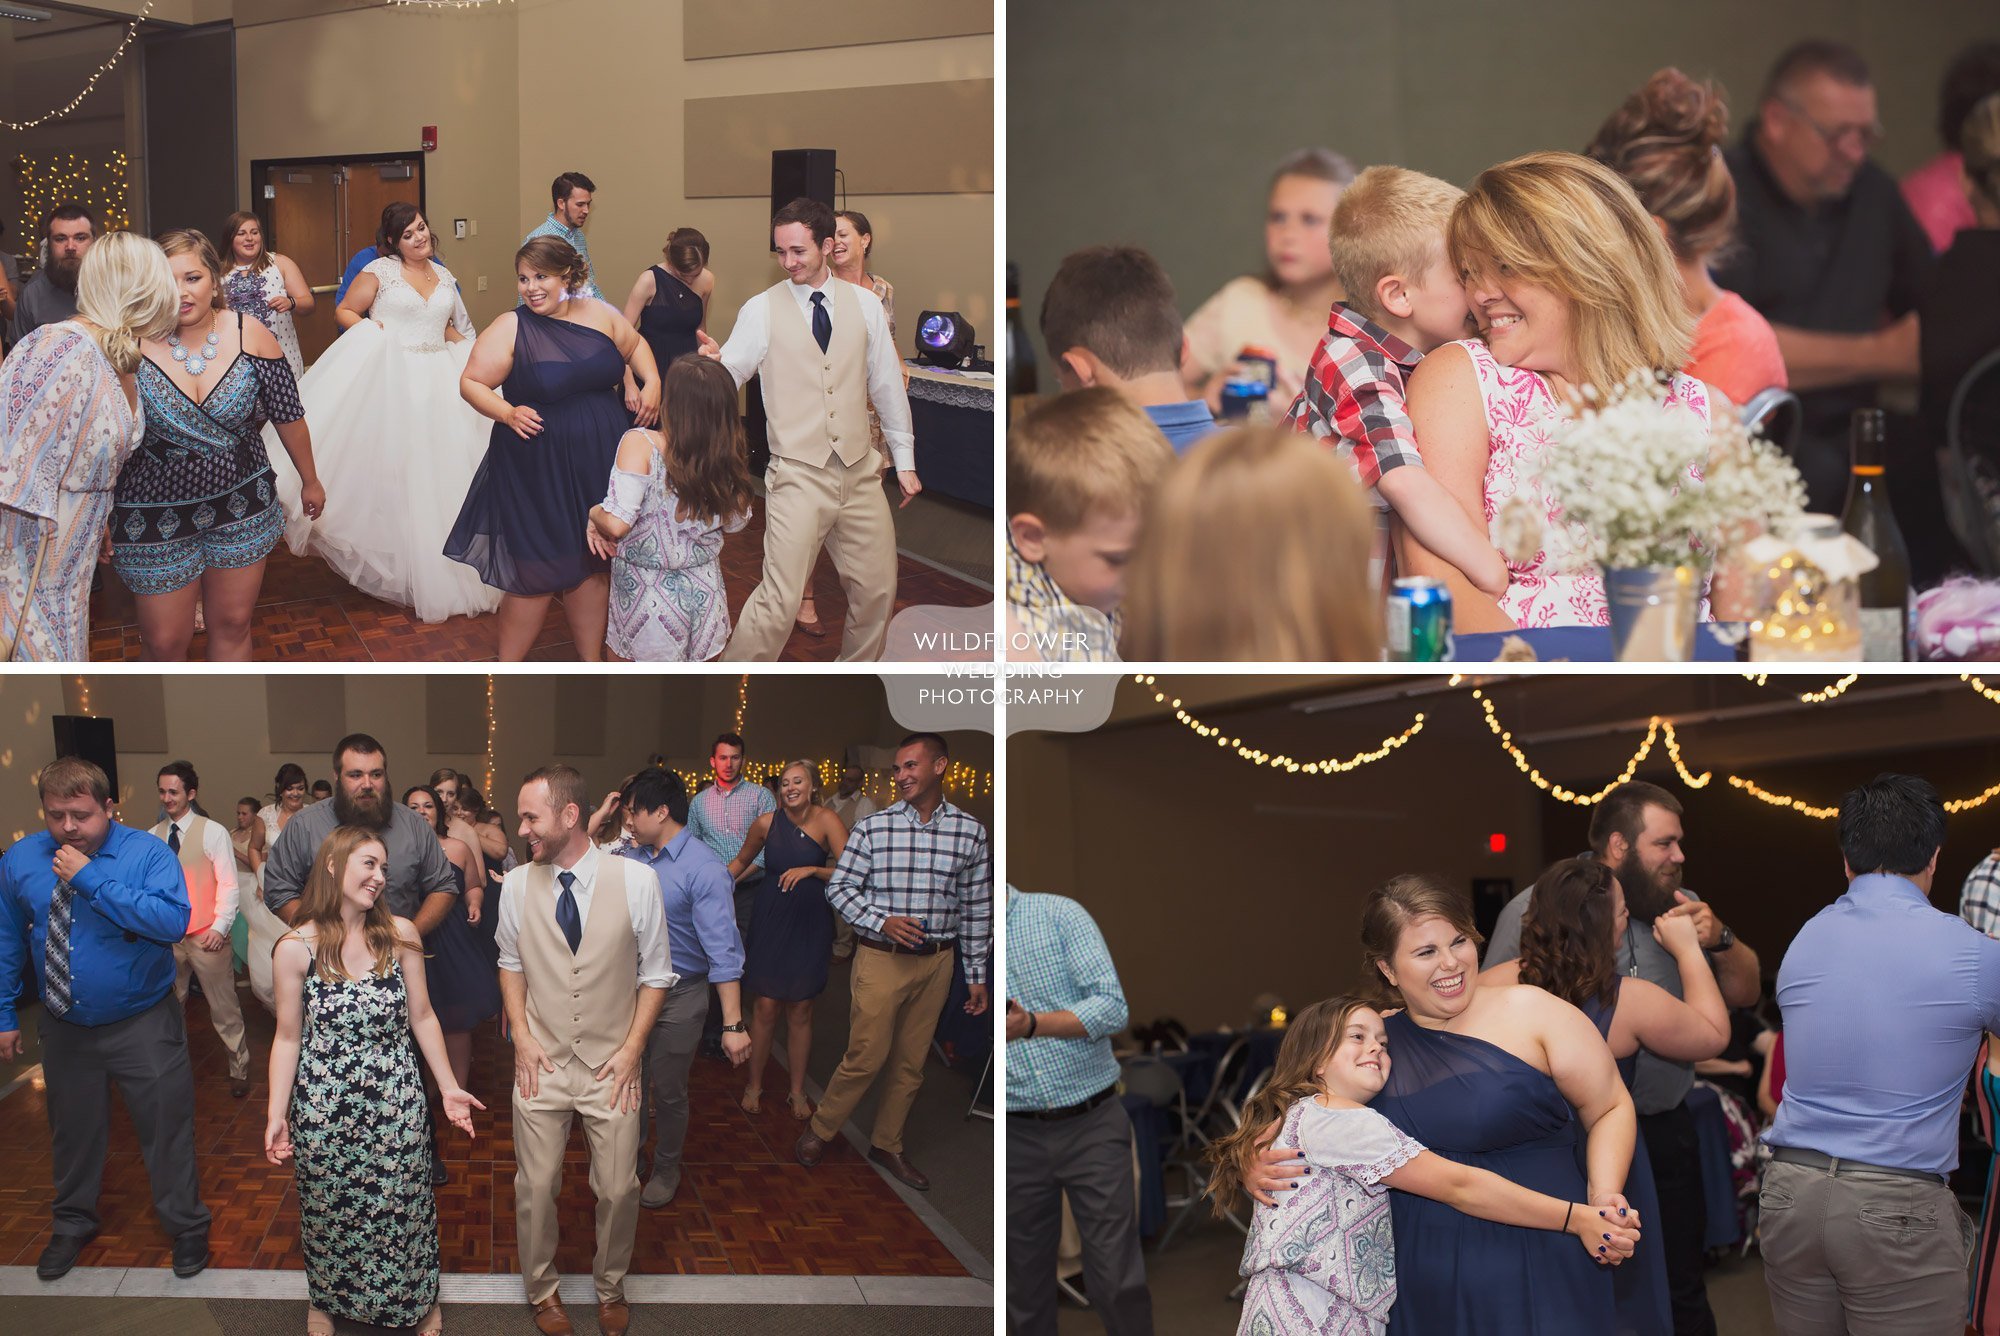 Guests dance during reception at Bradford Research Farm in MO.